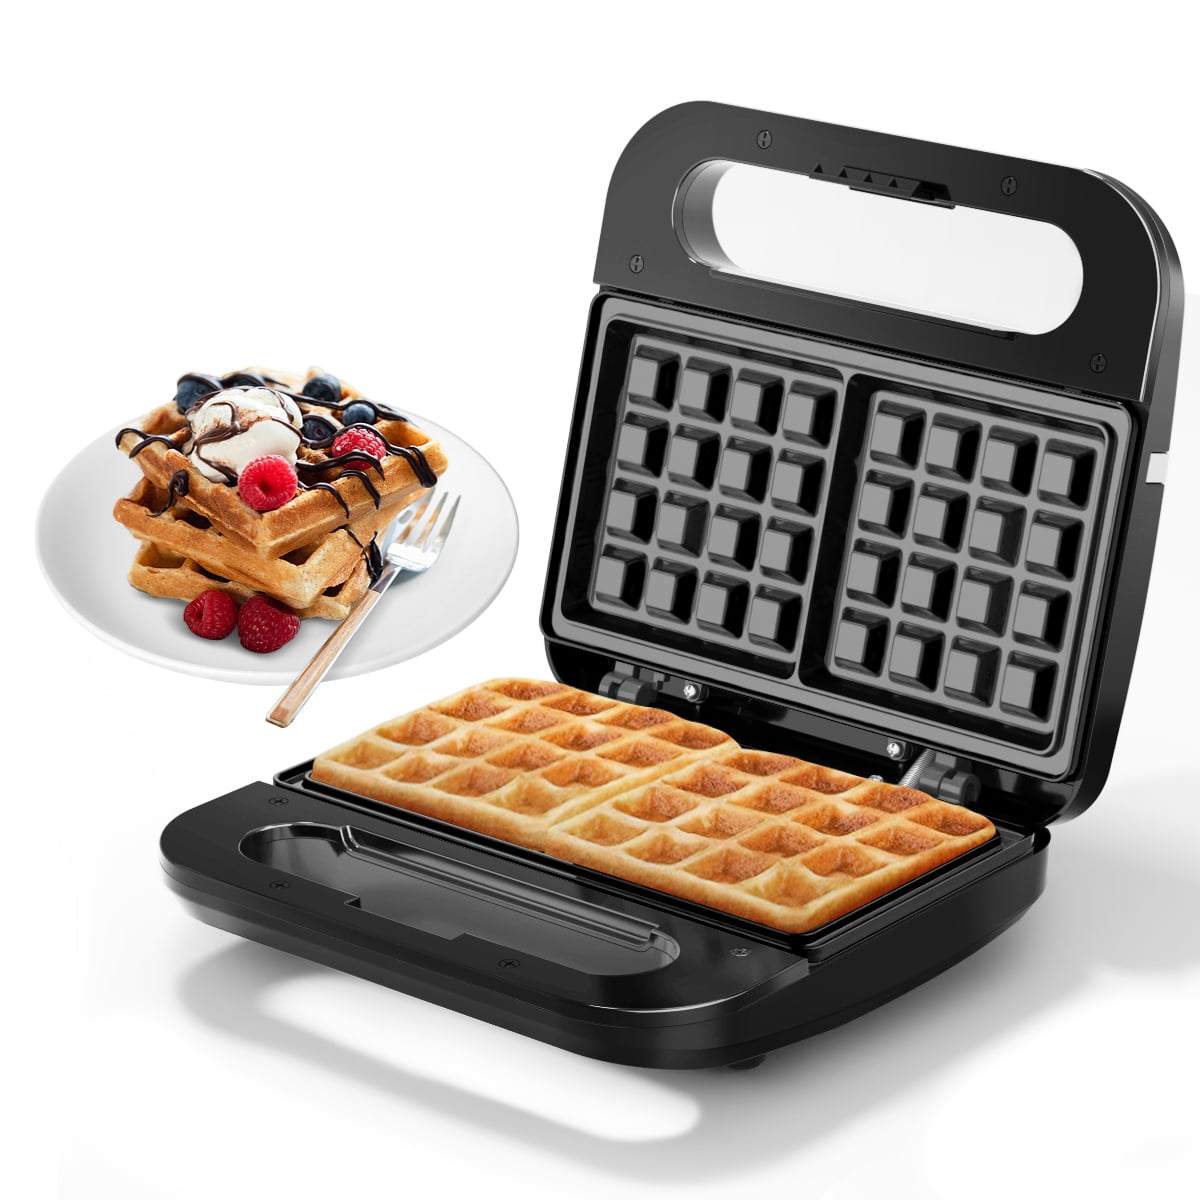  Sandwich Maker, Waffle Iron, multifun 2-in-1 Waffle, Omelet and  Turnover Maker with Non-stick Detachable Plates, LED Indicator Lights, Cool  Touch Handle, Anti-Skid Feet, Easy to Clean: Home & Kitchen